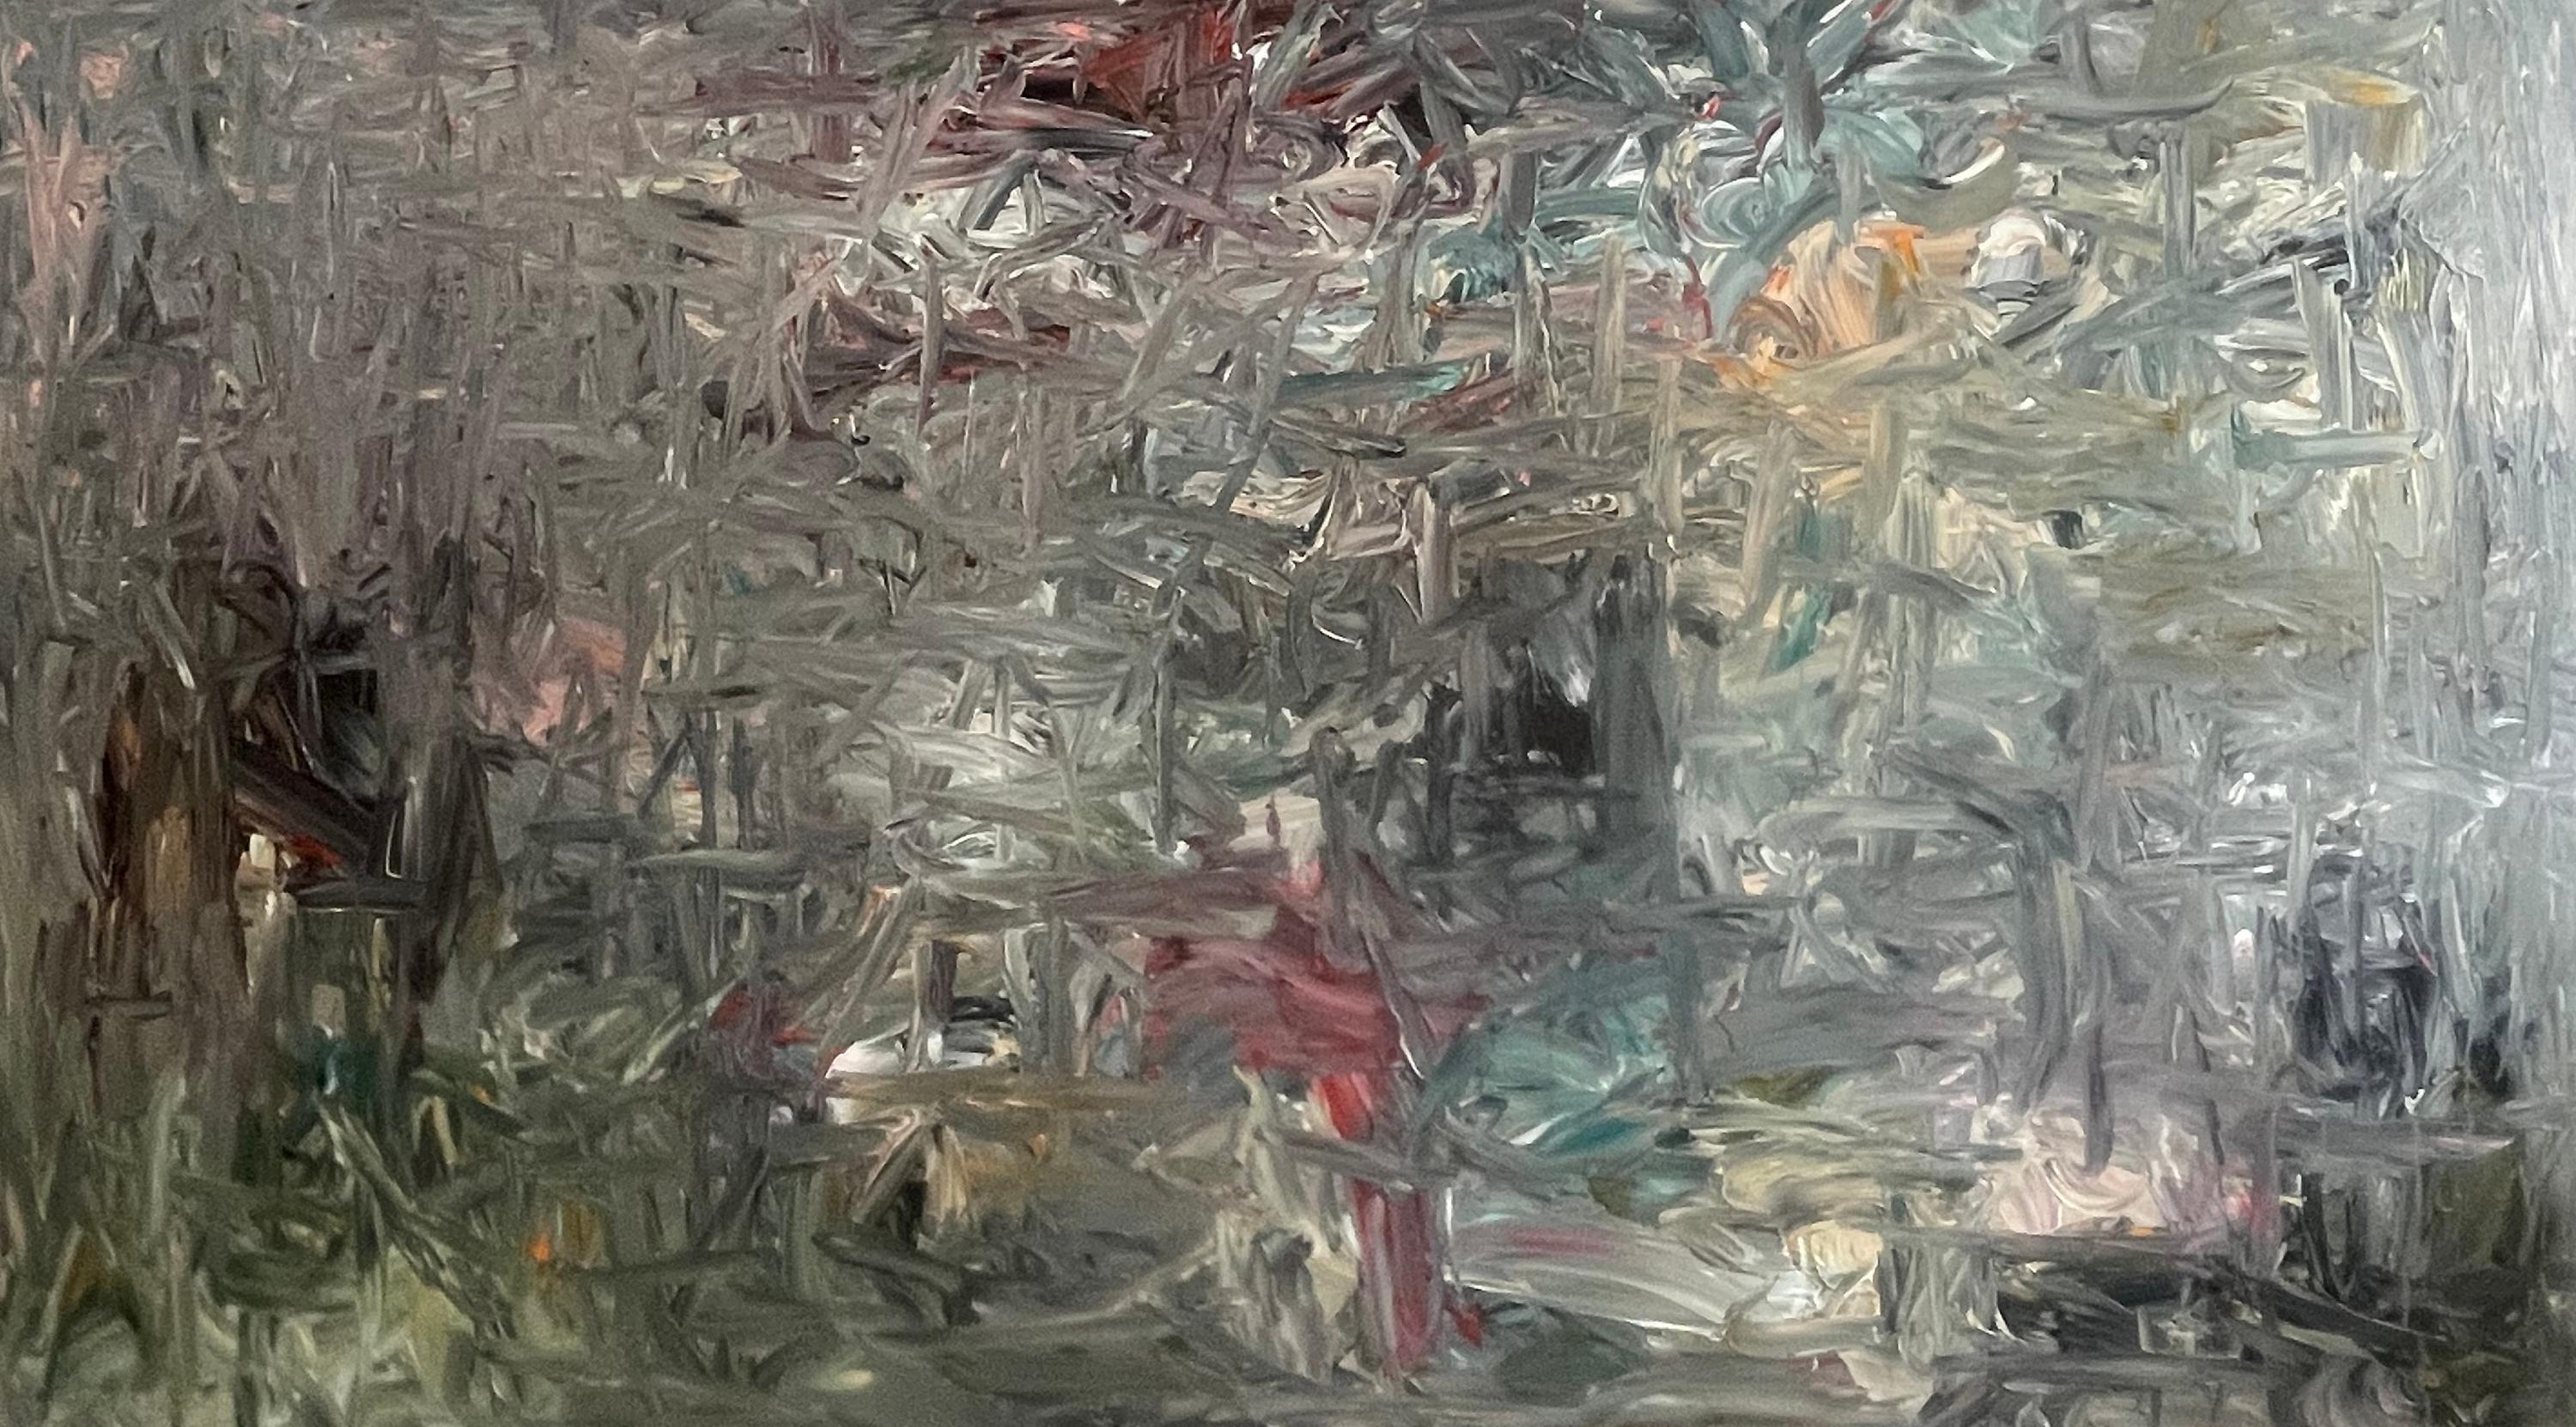 Collection: Beyond the Horizon
Acrylic on canvas

Md Tokon's style has reflected the art of American Abstract Expressionists. Md Tokon spent his early years in Jhenidah and Dhaka. The physicality and immediacy of his paintings are inspired moments